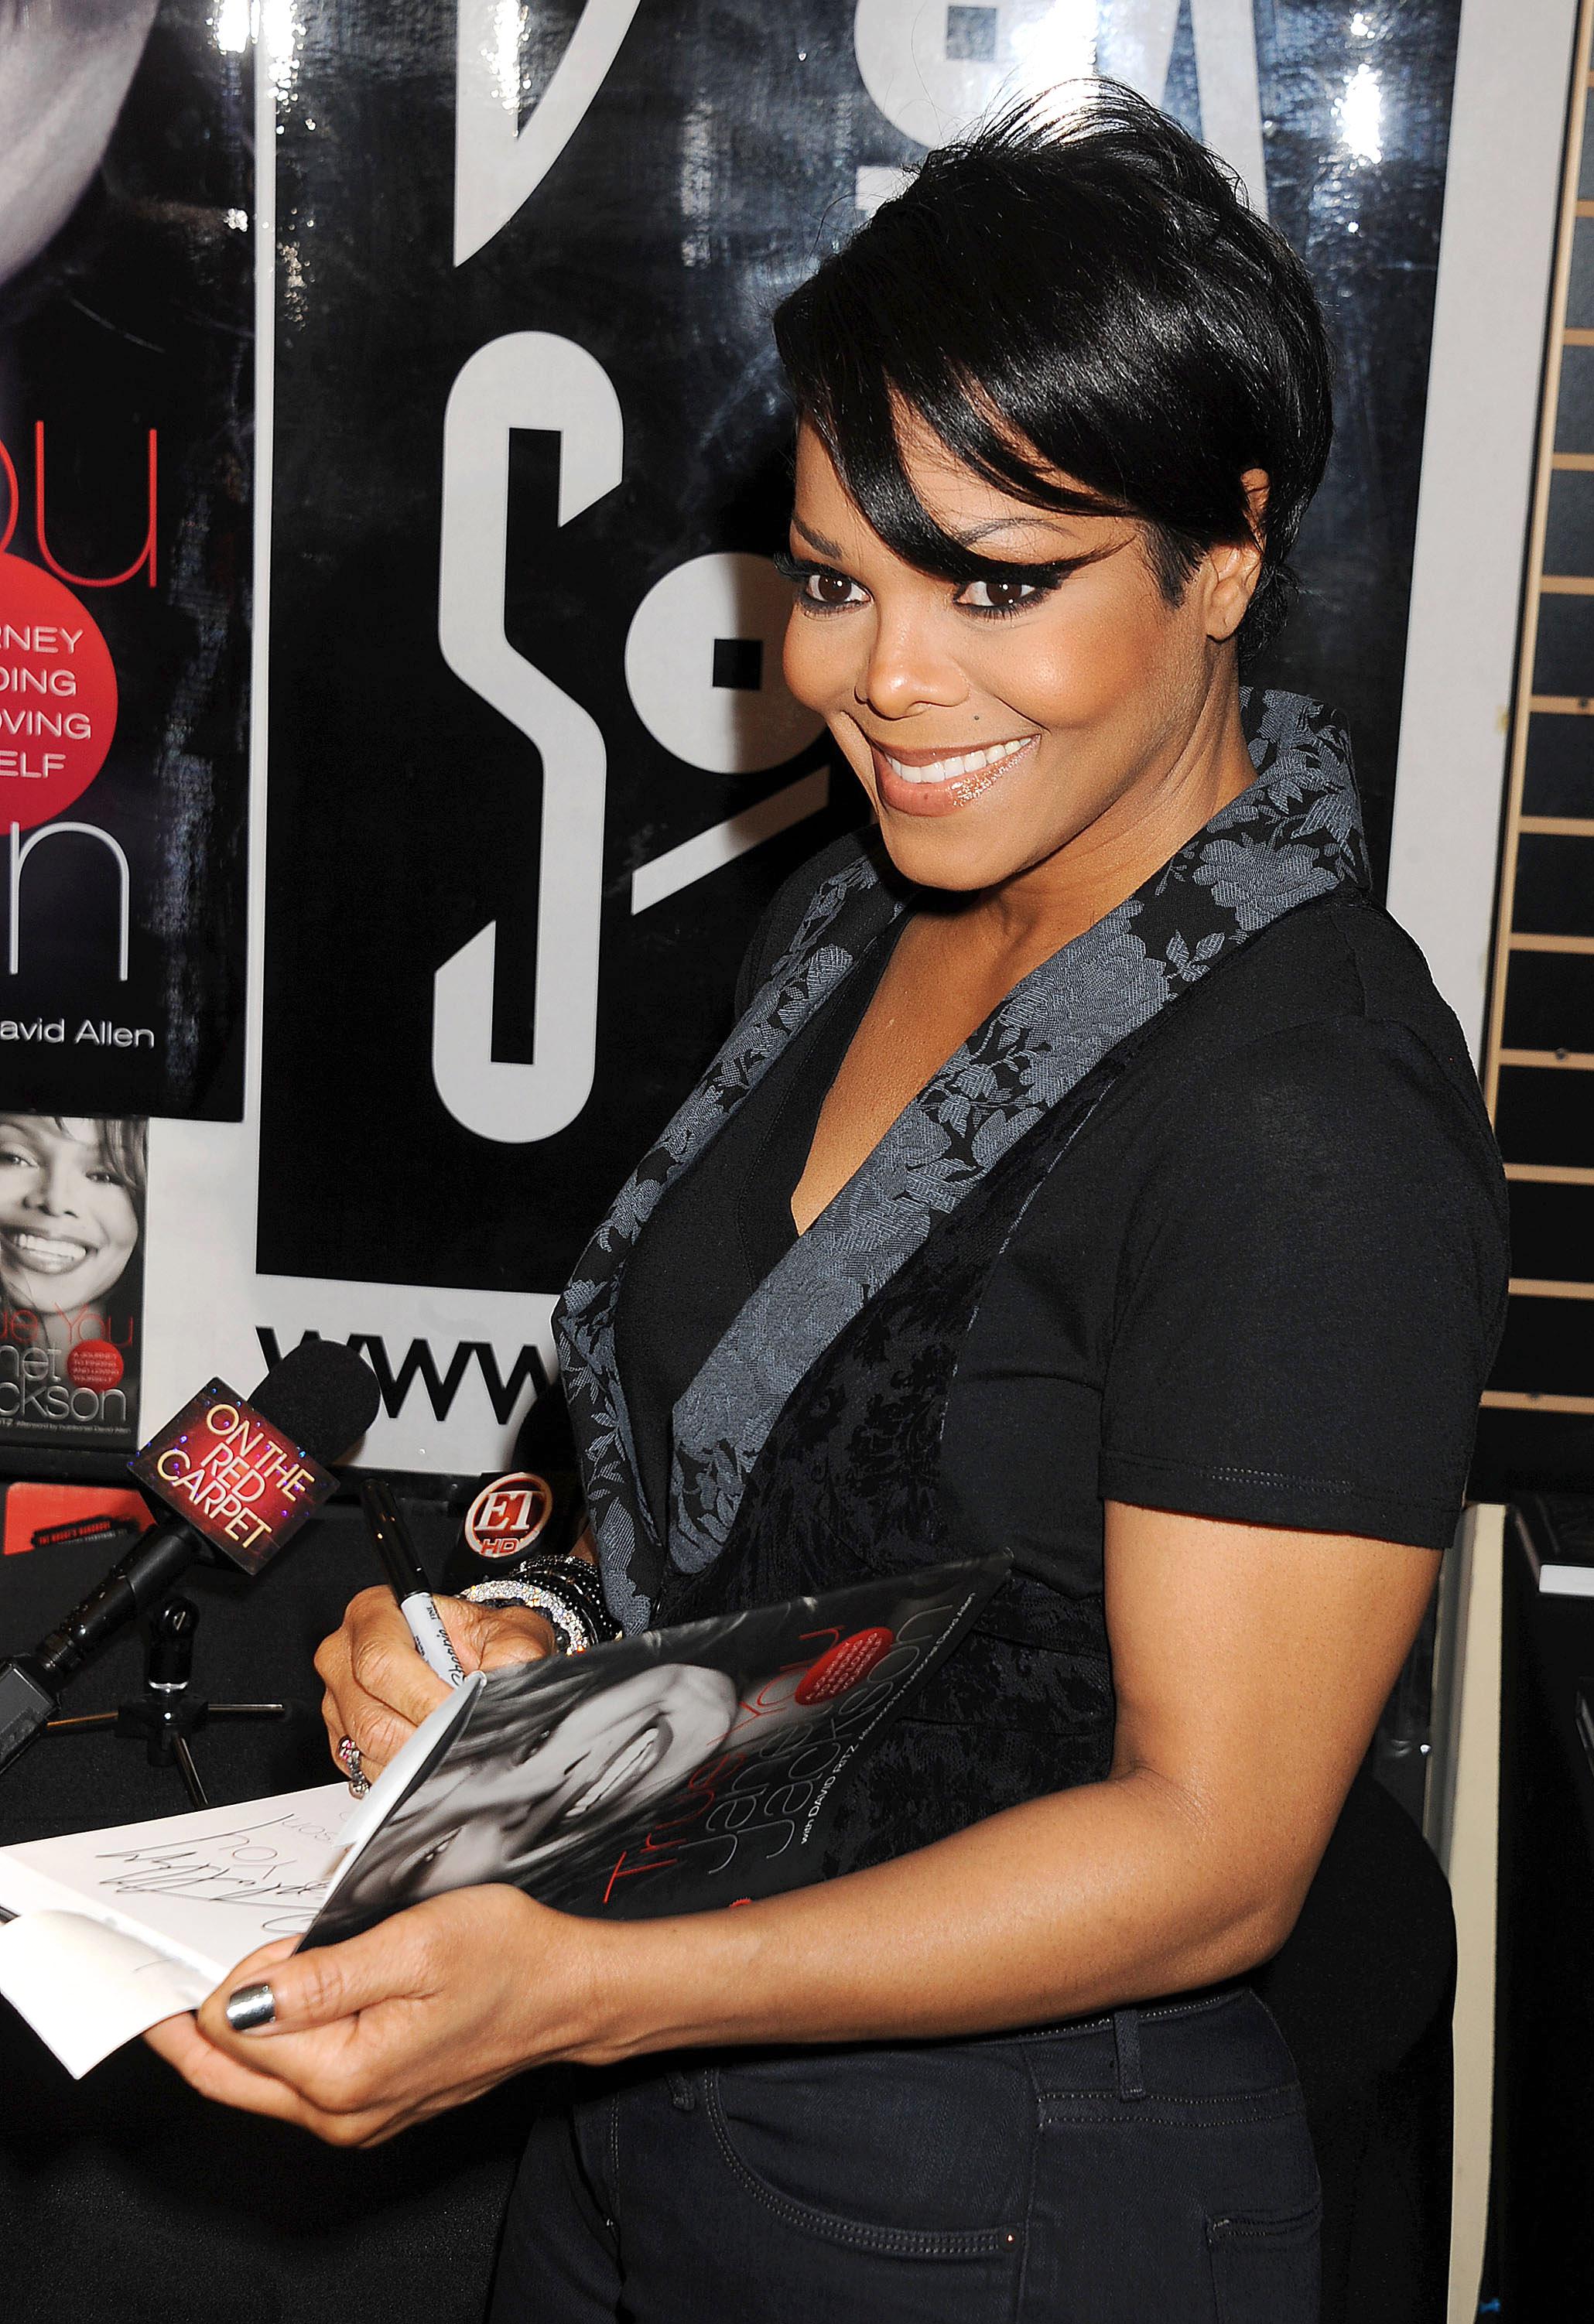 Janet Jackson Signs Copies Of Her New Book 'TRUE YOU: A Guide To Finding And Loving Yourself'